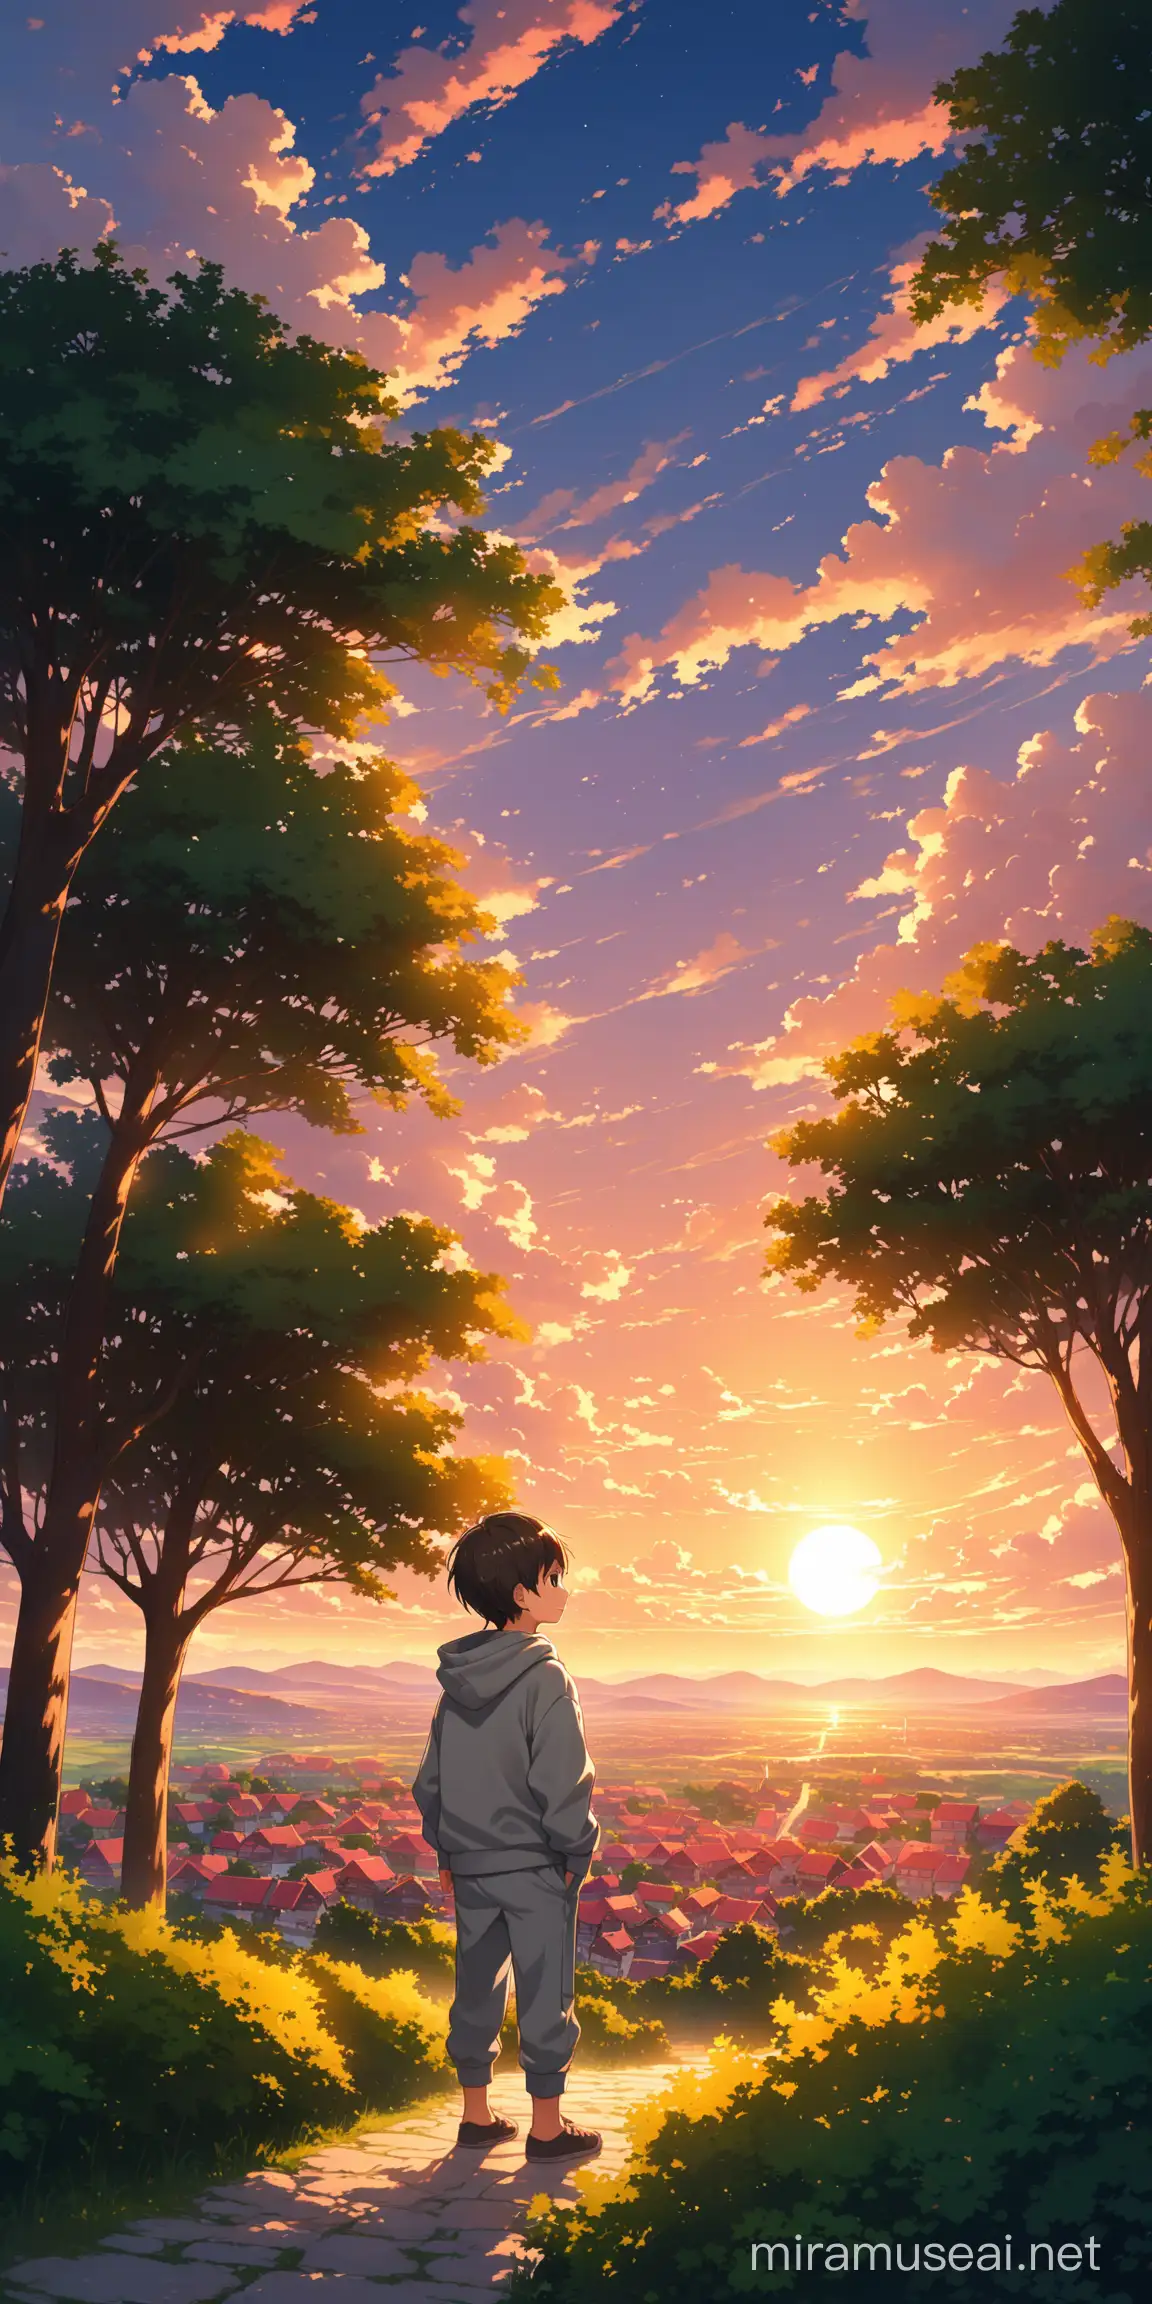 A young boy(wearing a grey hoodie and a trouser)on a place that can seen a whole town(a high placeand boy is standing between some trees and bushes), town showing small and wide,beautiful evening sunset can be showed,bright round sun and clouds in the sky, dark pink themed sunlight has lightned everywhere,landsacpe.